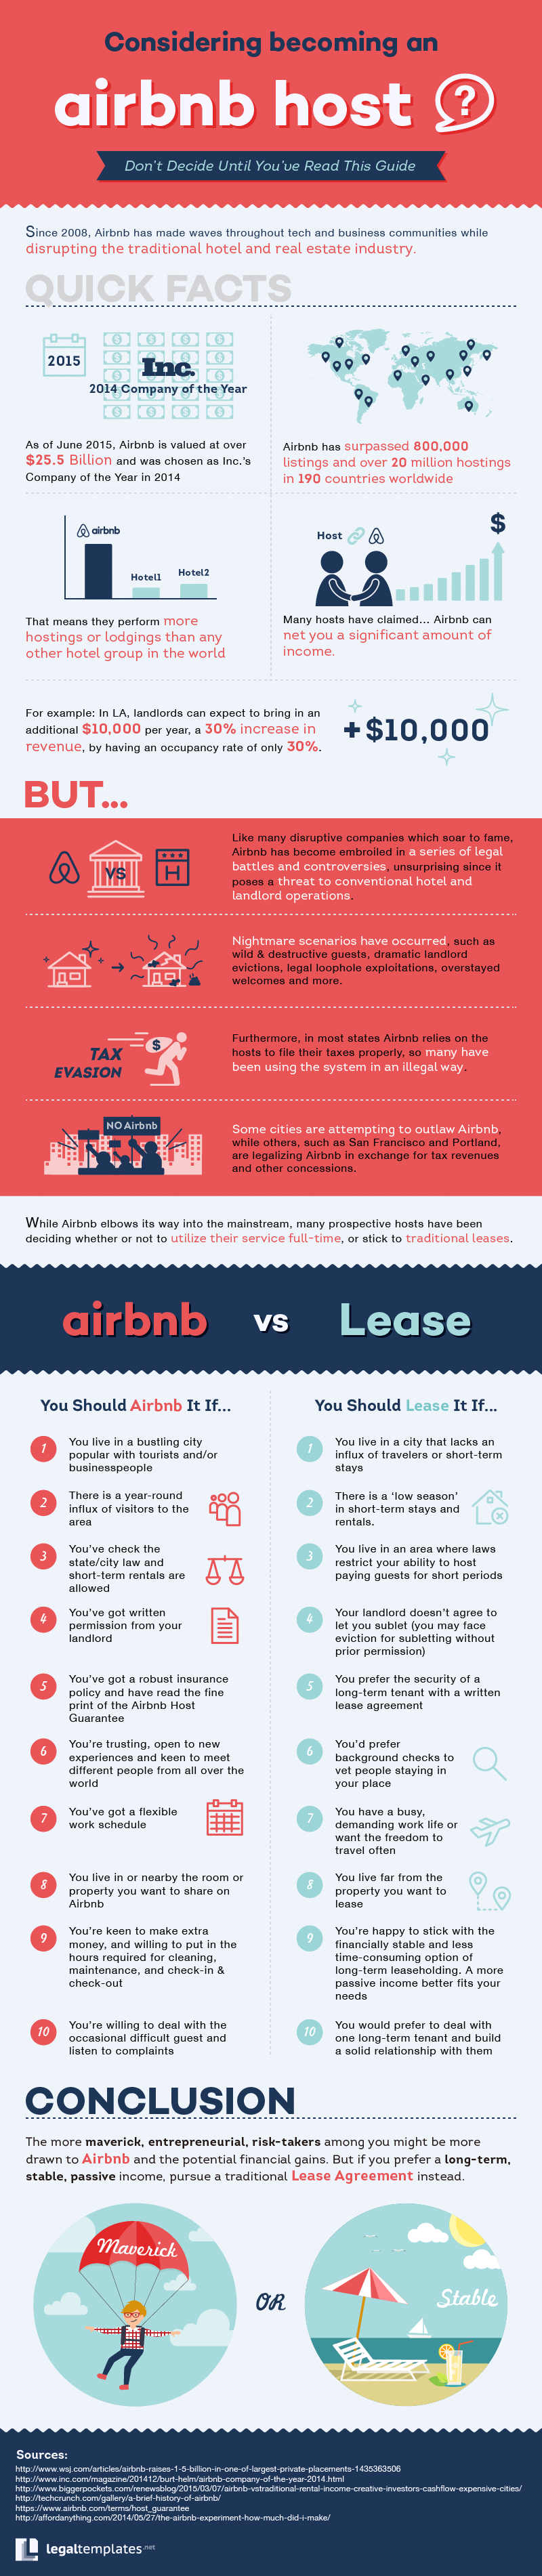 Airbnb Infographic